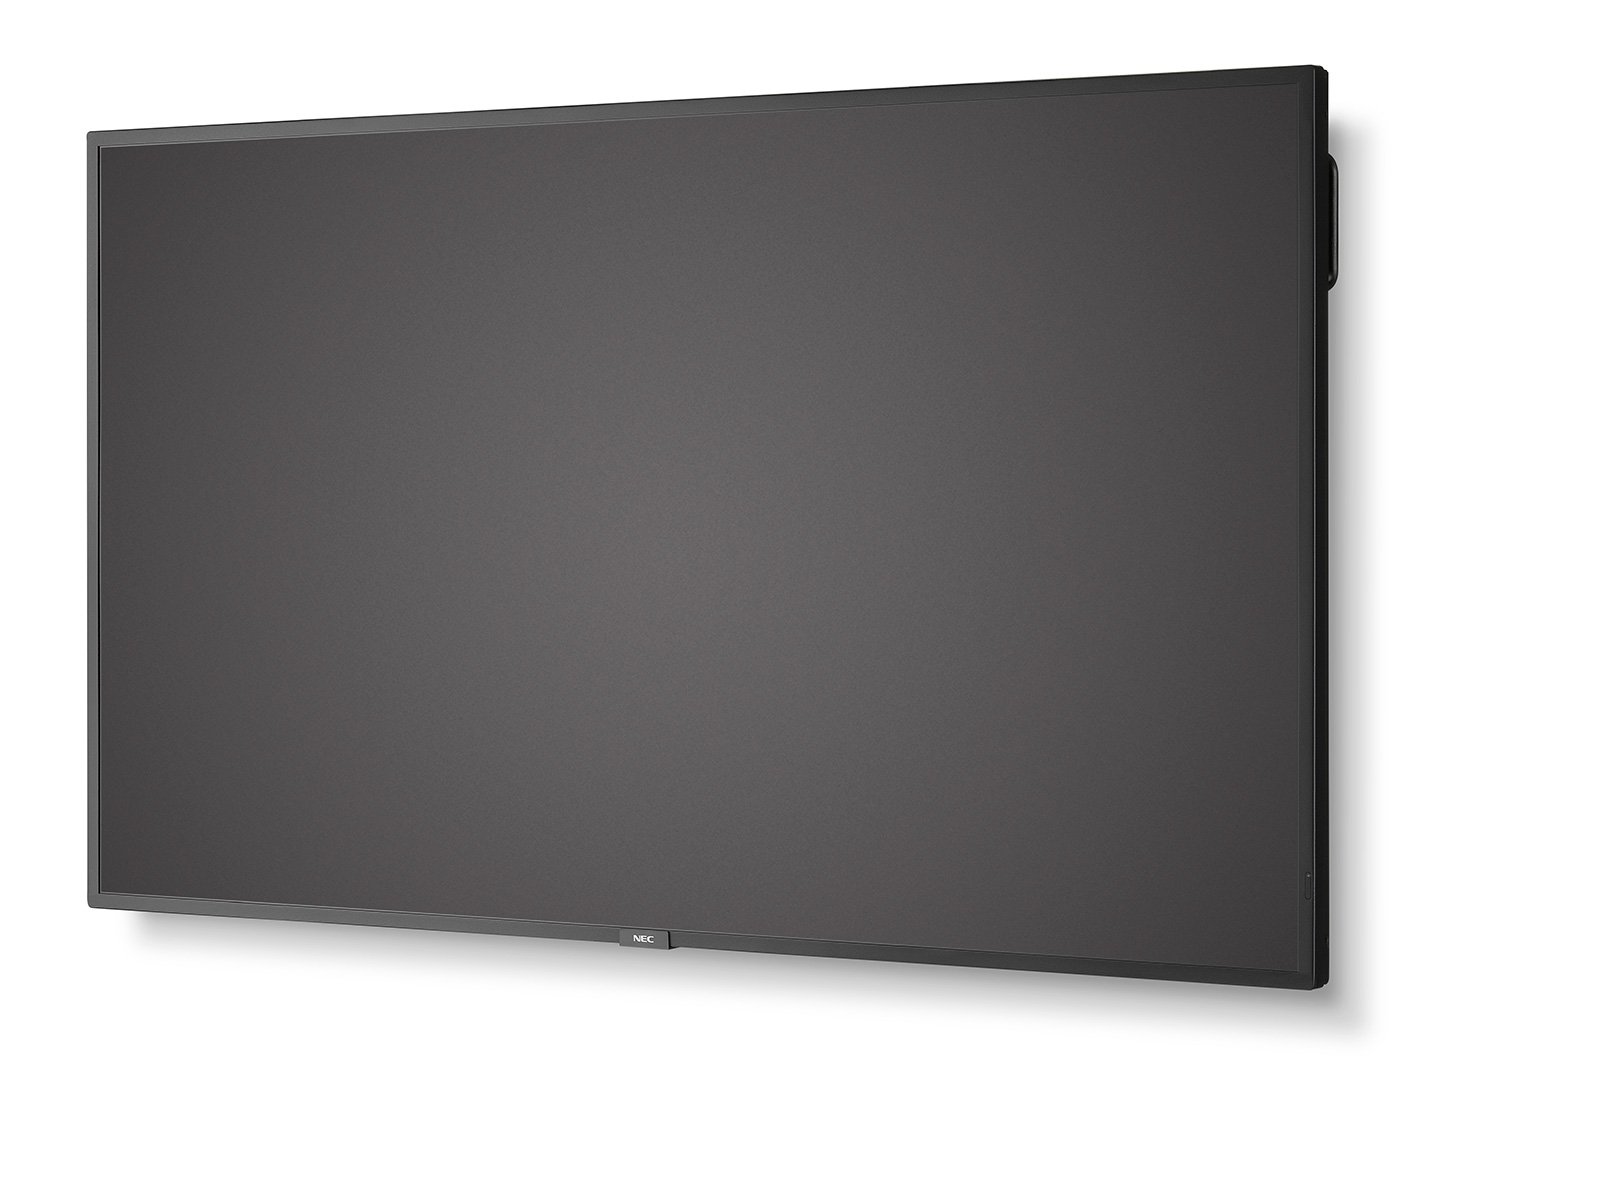 NEC MultiSync ME431-MPi4 - 43 inch - 400 cd/m² - Ultra-HD - 3840x2160 Pixel - 18/7 - incl. NEC MediaPlayer - Message Essential Large Format Display